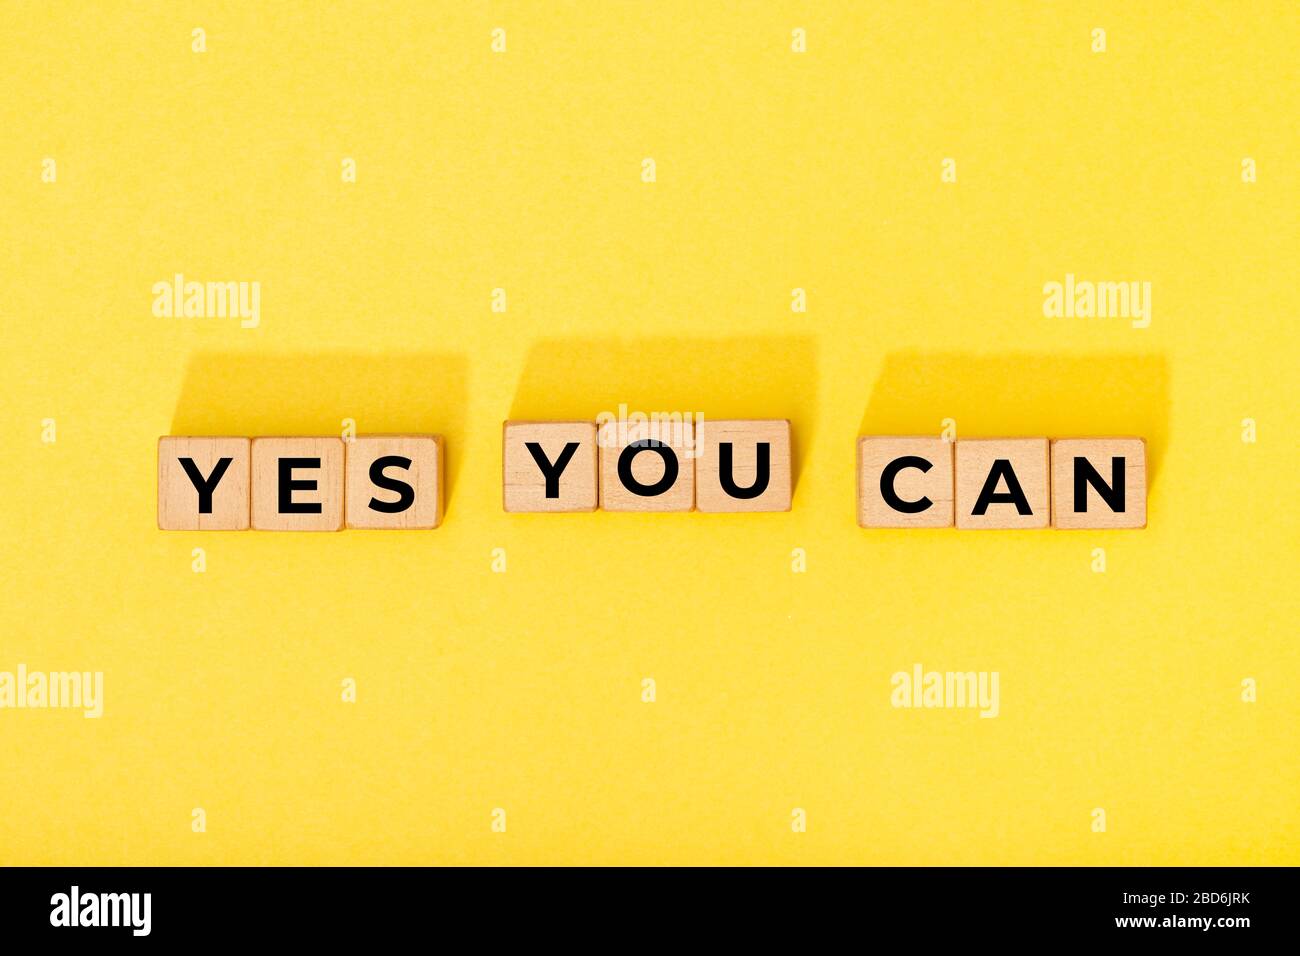 Yes you can message on wooden blocks. Motivational Words Quotes Concept Stock Photo